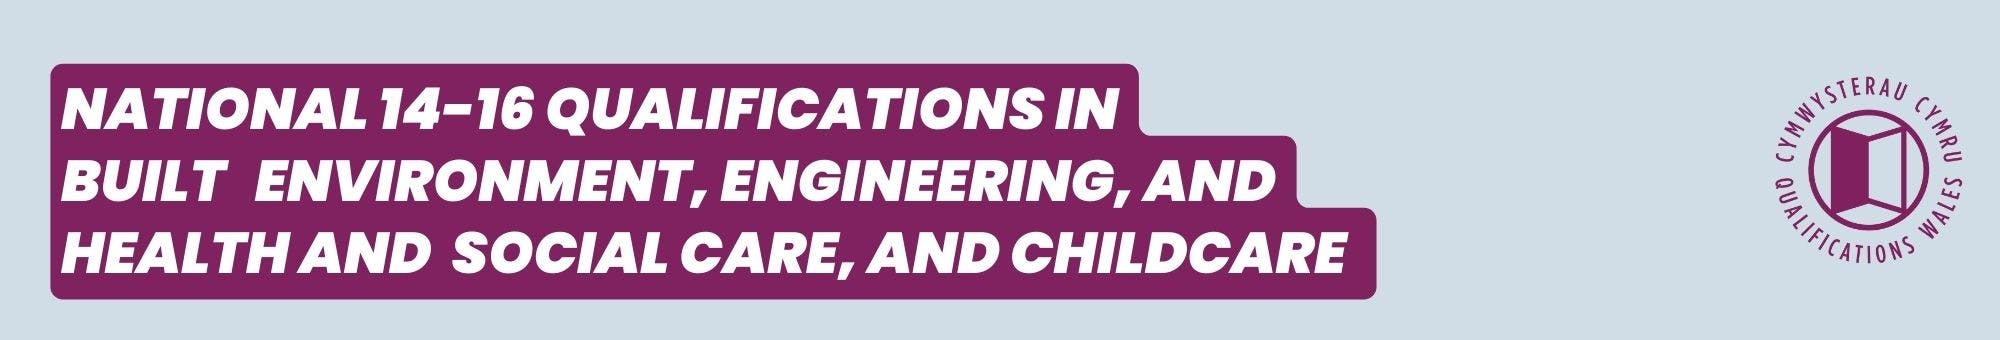 National 14-16 Qualifications in Built Environment, Engineering, and Health and Social Care, and Childcare